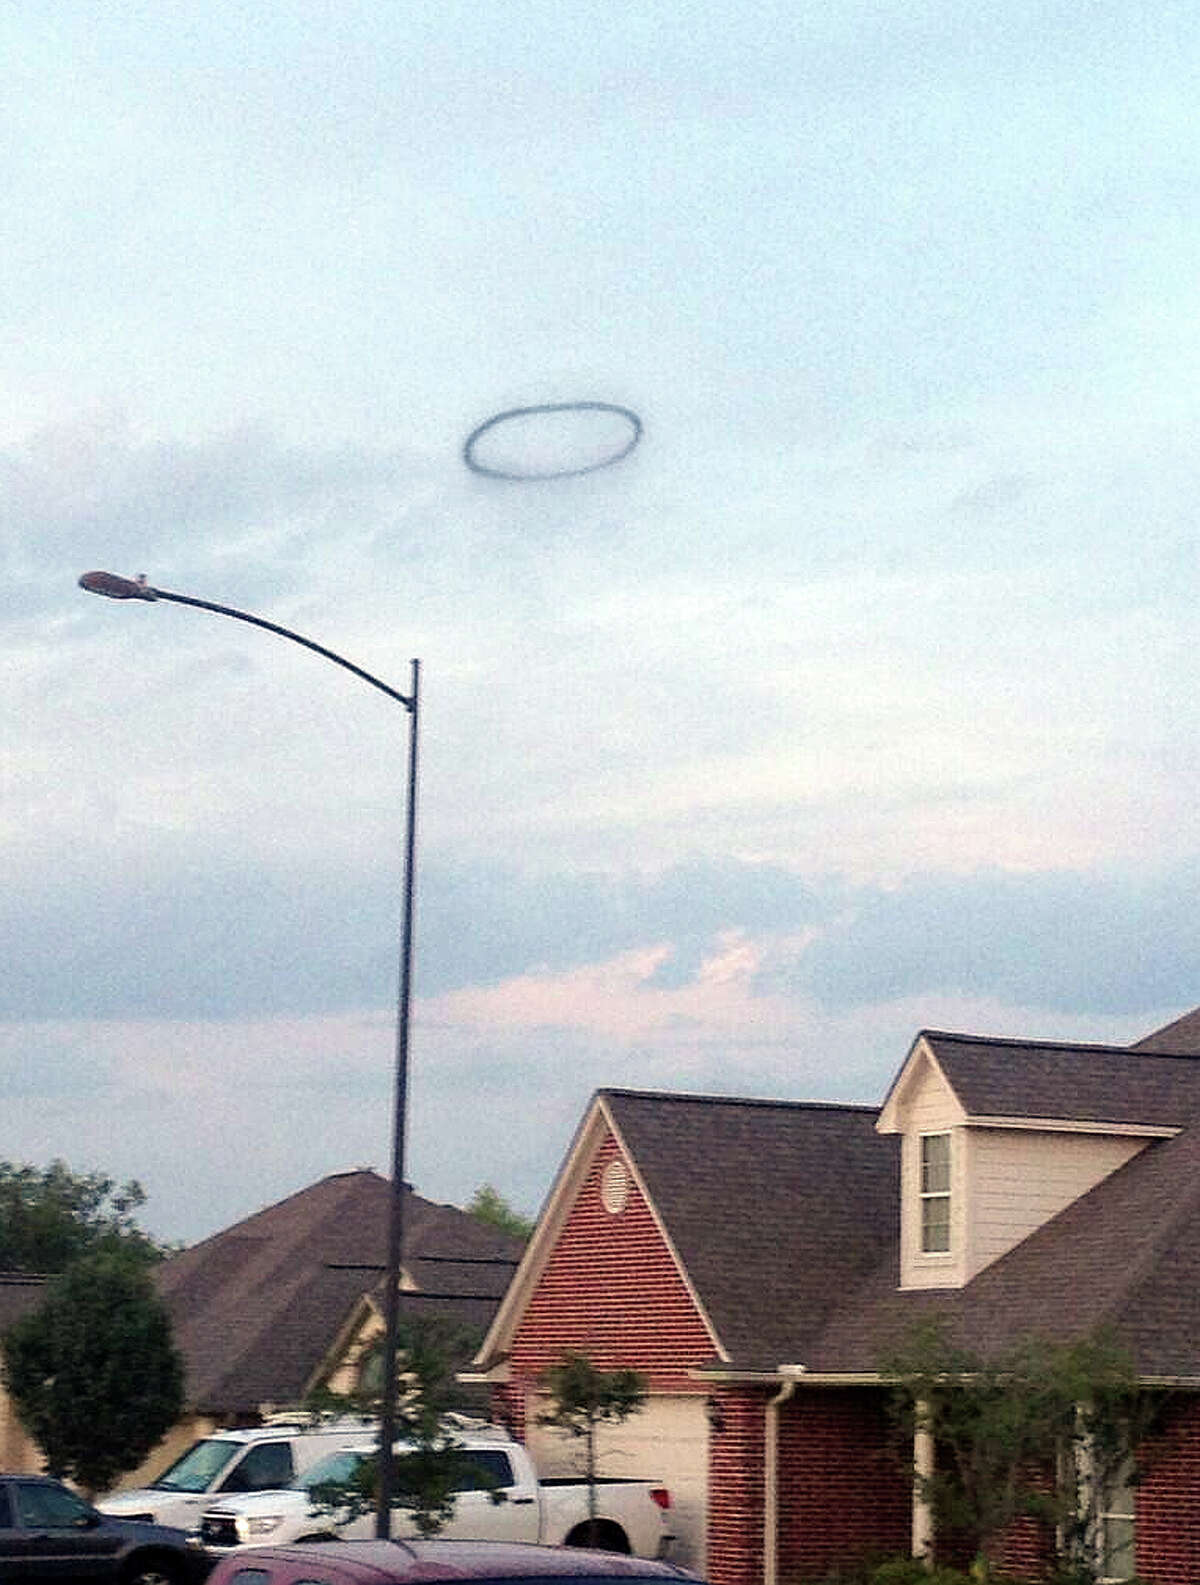 A smoke ring rises over College Station after an explosion July 25, 2013. (James E. Miculka via Twitter)